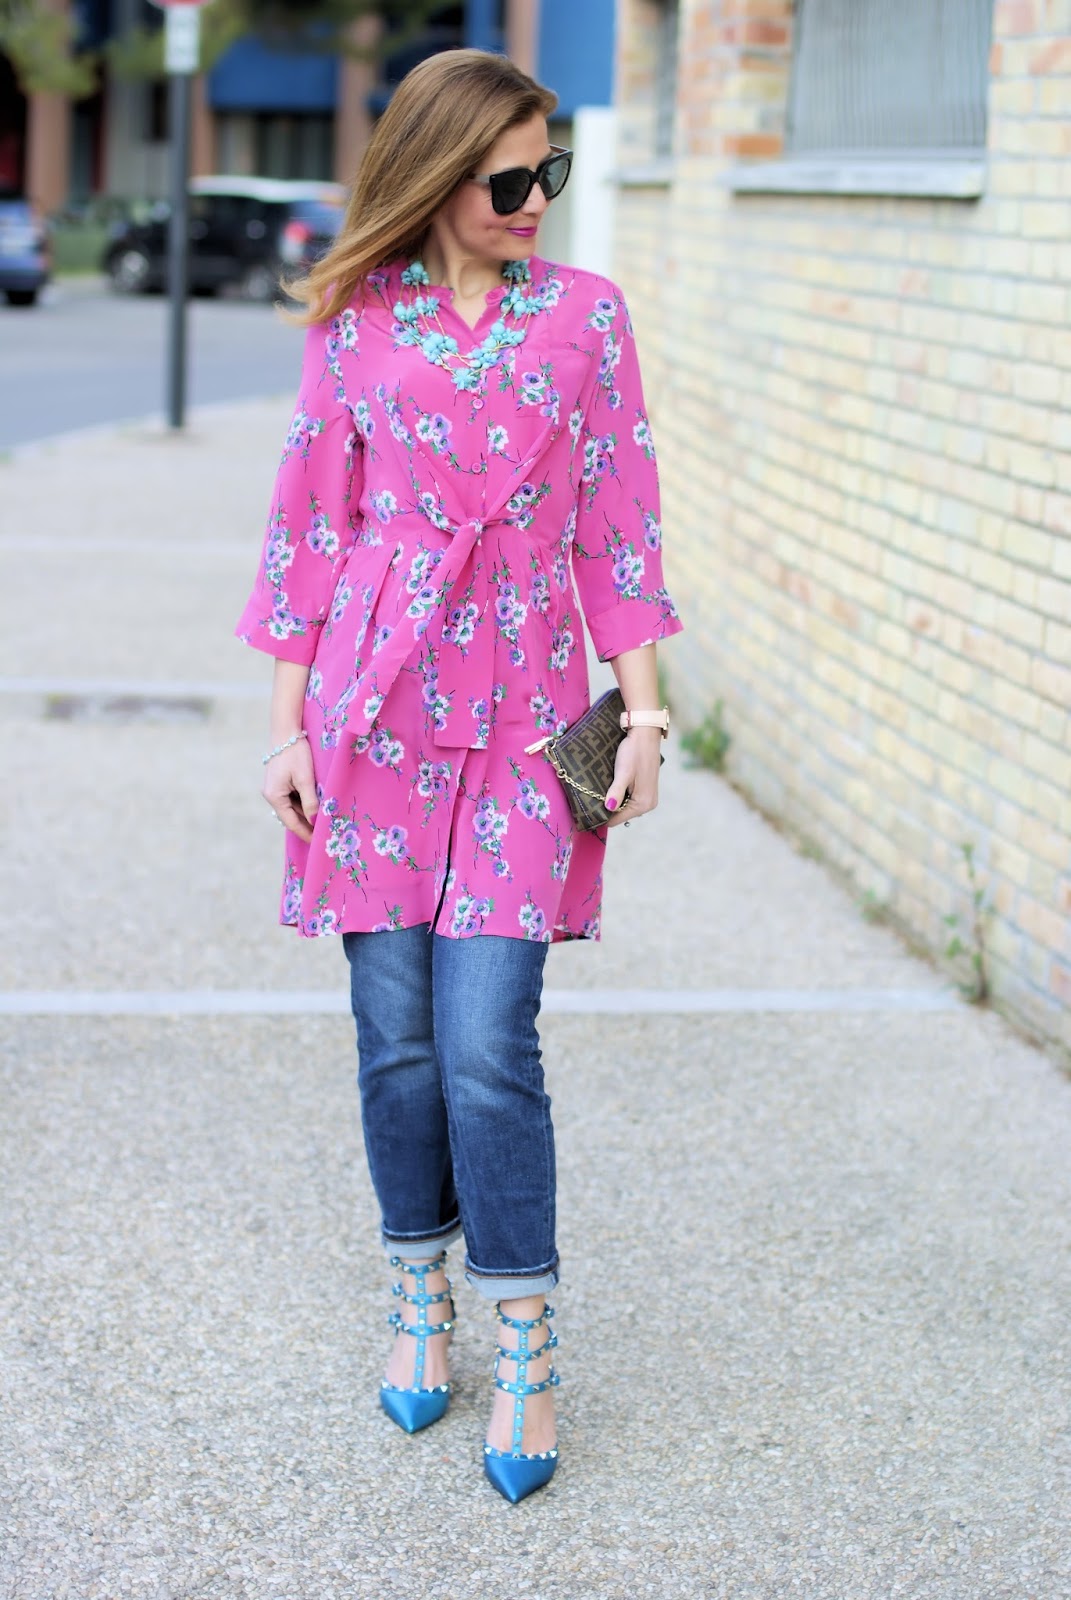 How to wear a dress over jeans with Metisu dress and Valentino Rockstud pumps on Fashion and Cookies fashion blog, fashion blogger style